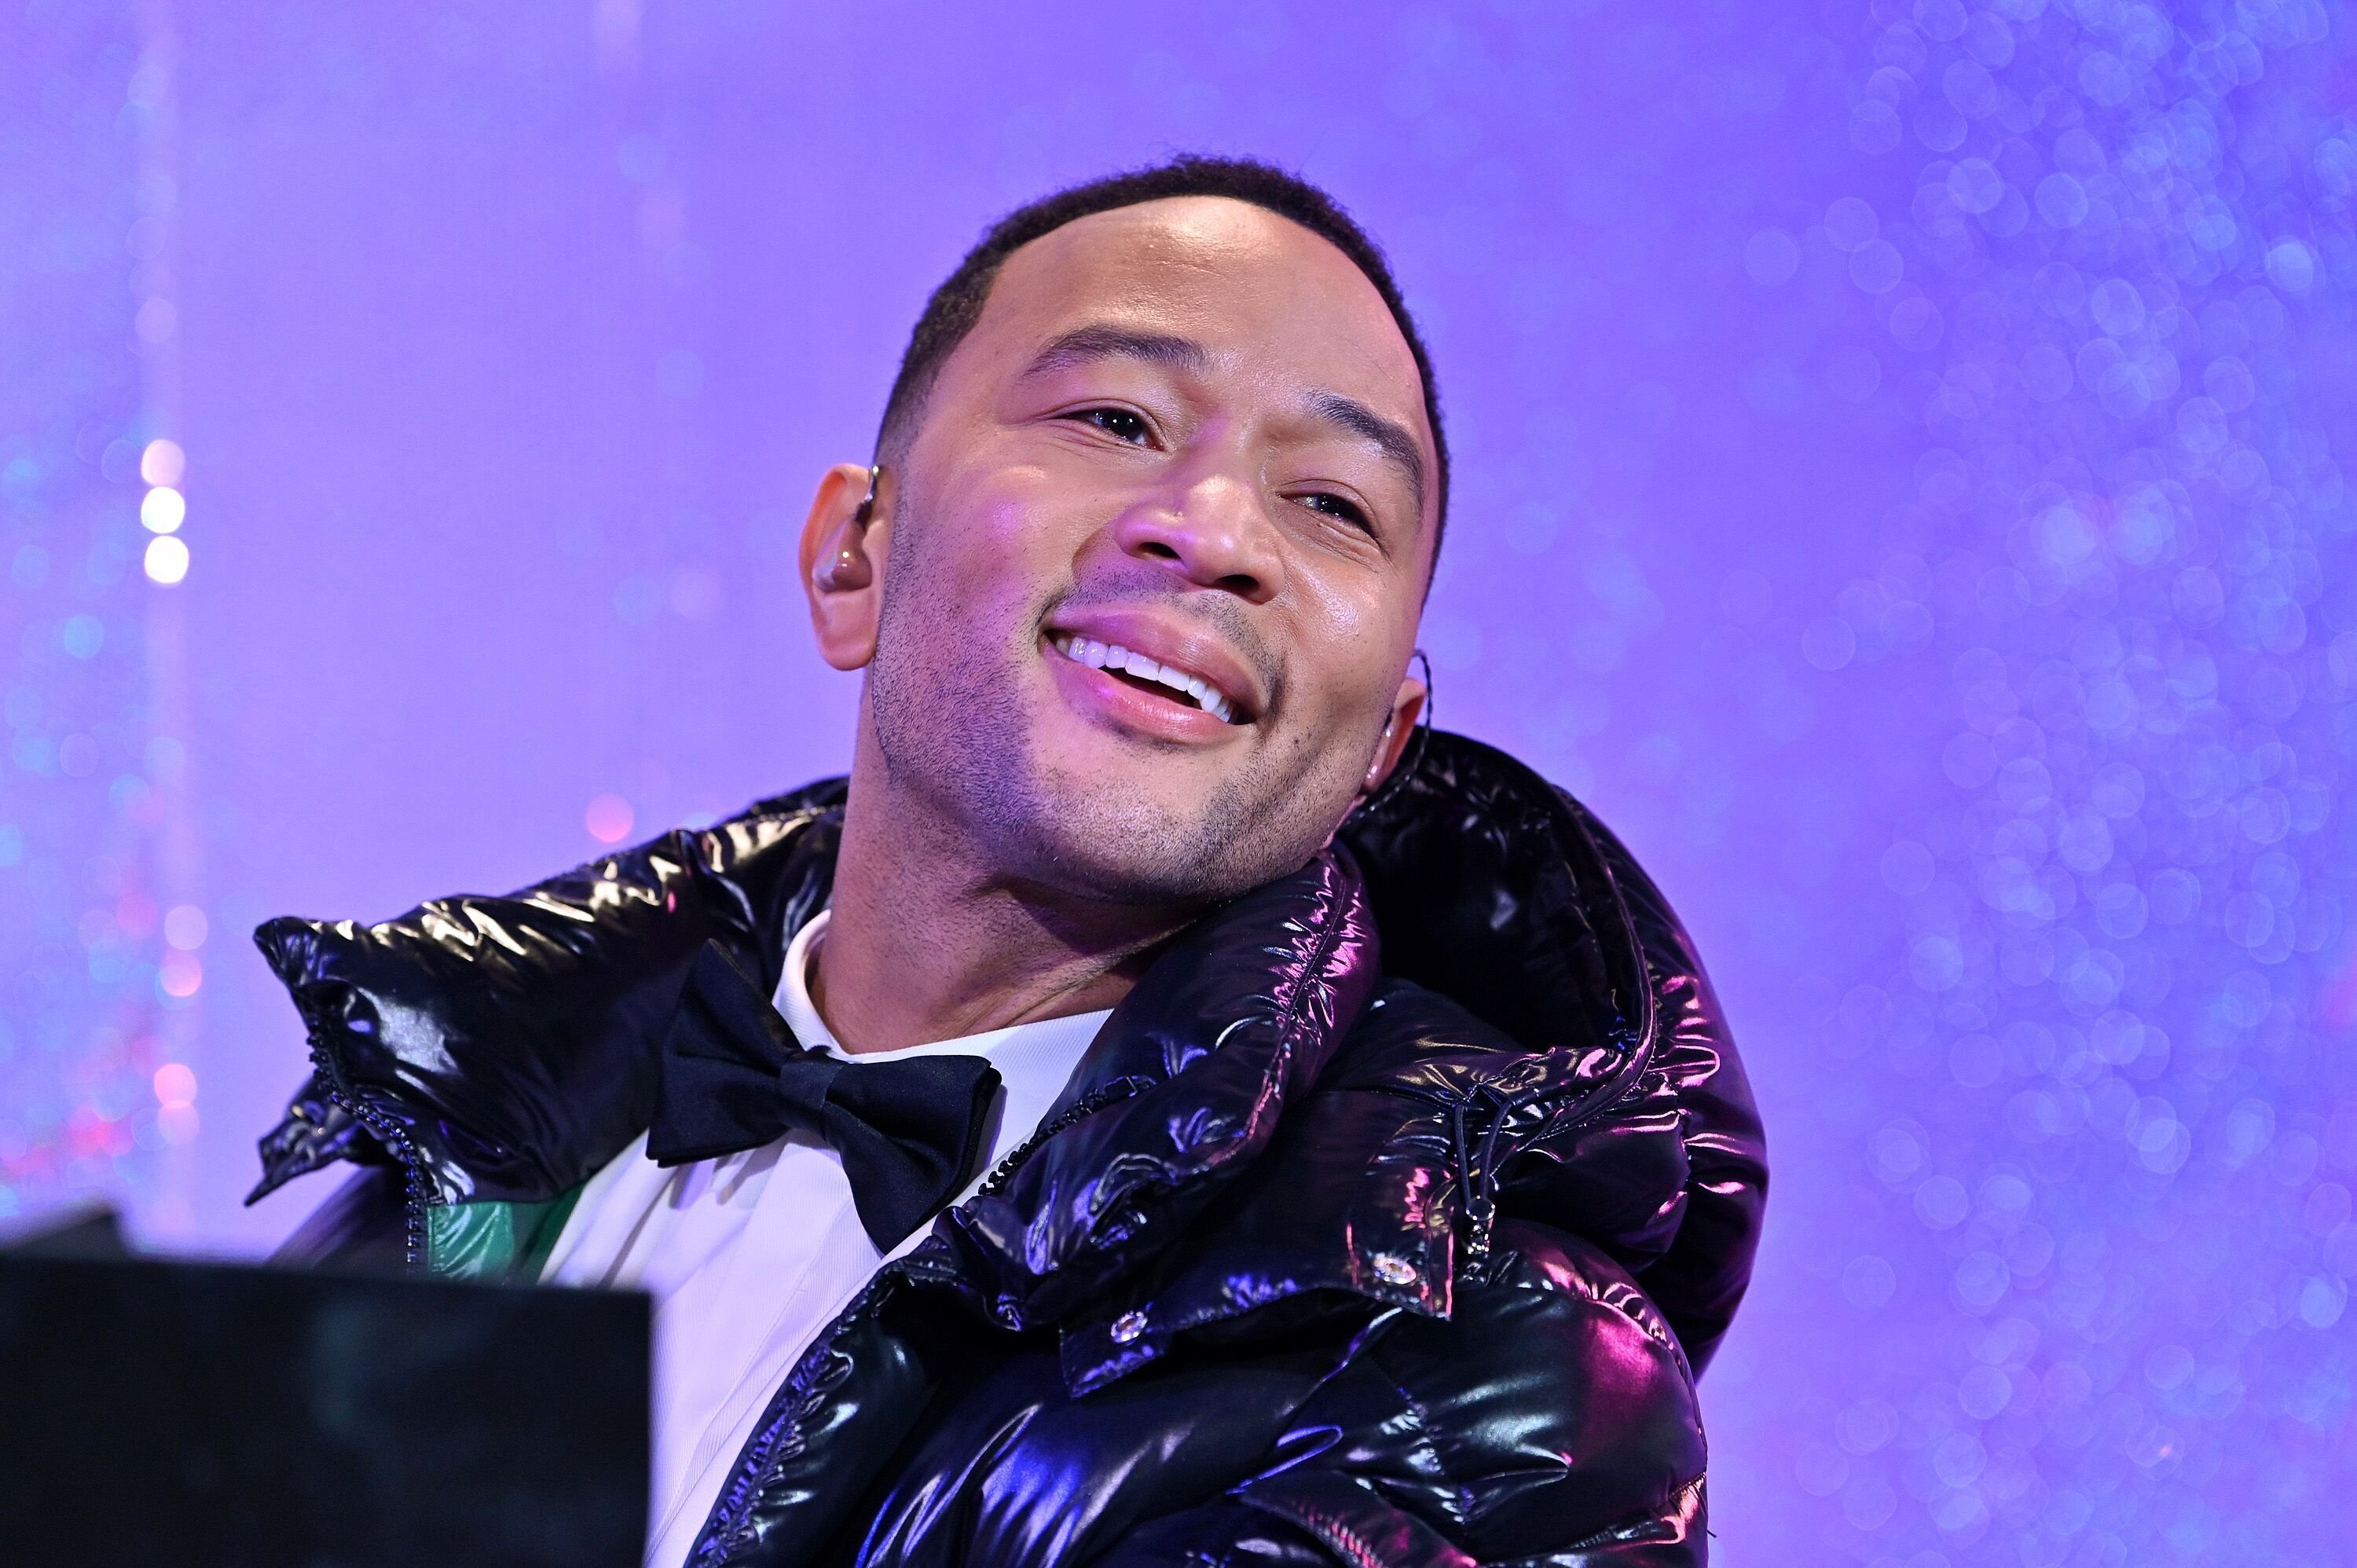 A portrait of John Legend performing onstage | Source: Getty Images/GlobalImagesUkraine